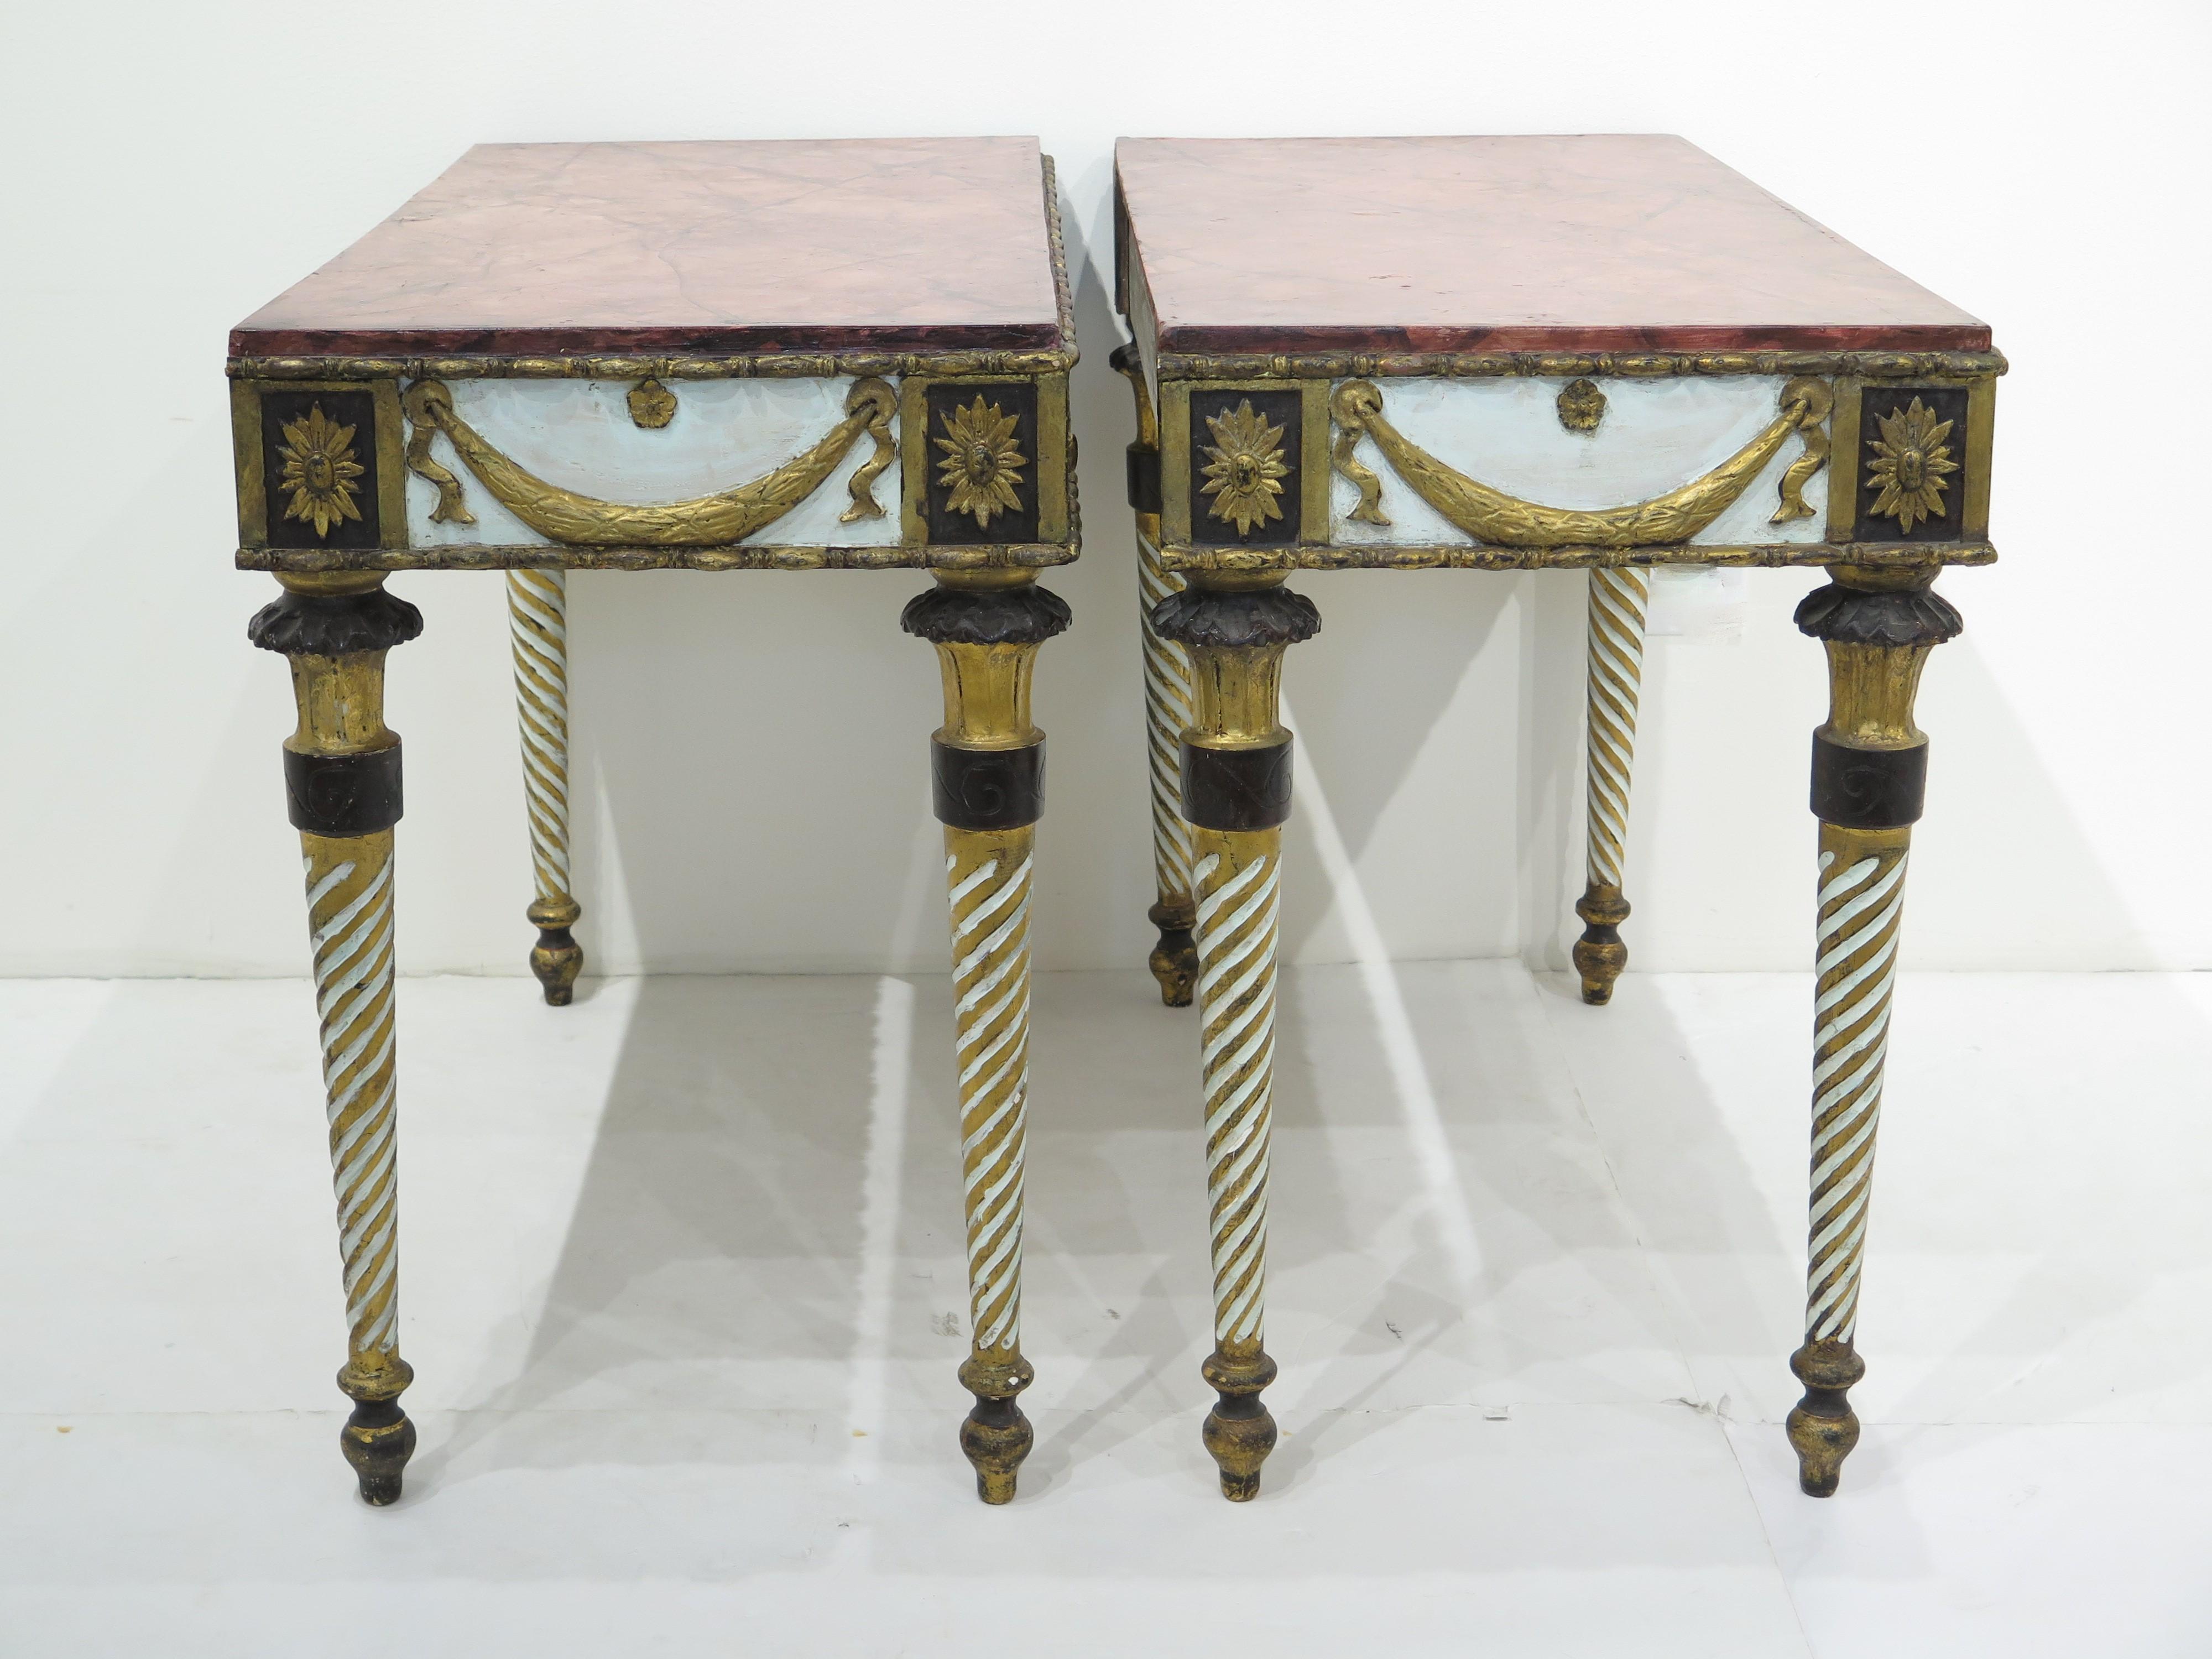 Polychromed Neoclassic Style Painted Console Tables with Faux Marble Tops For Sale